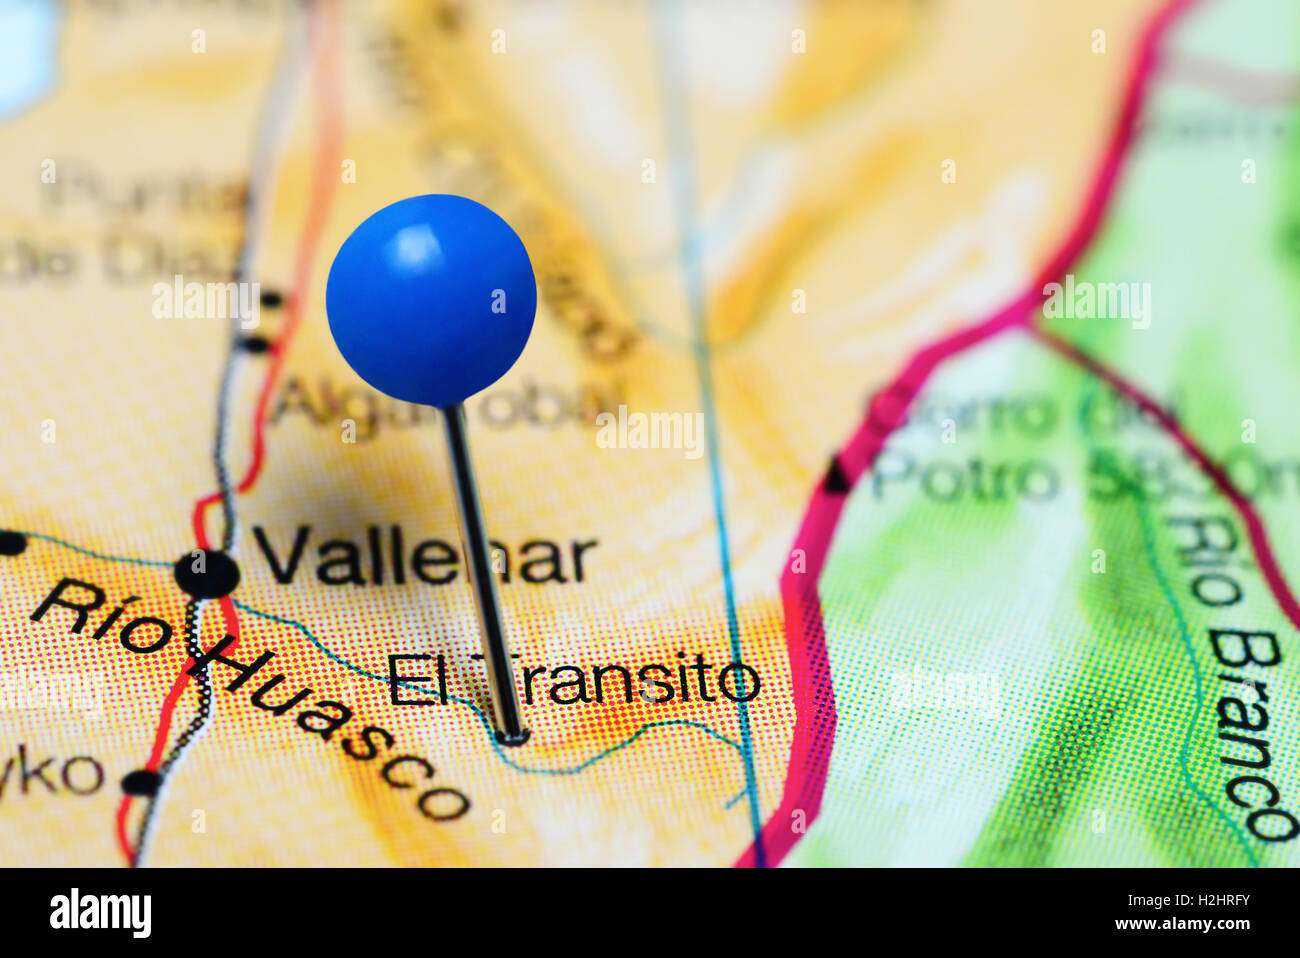 El Transito pinned on a map of Chile Stock Photo